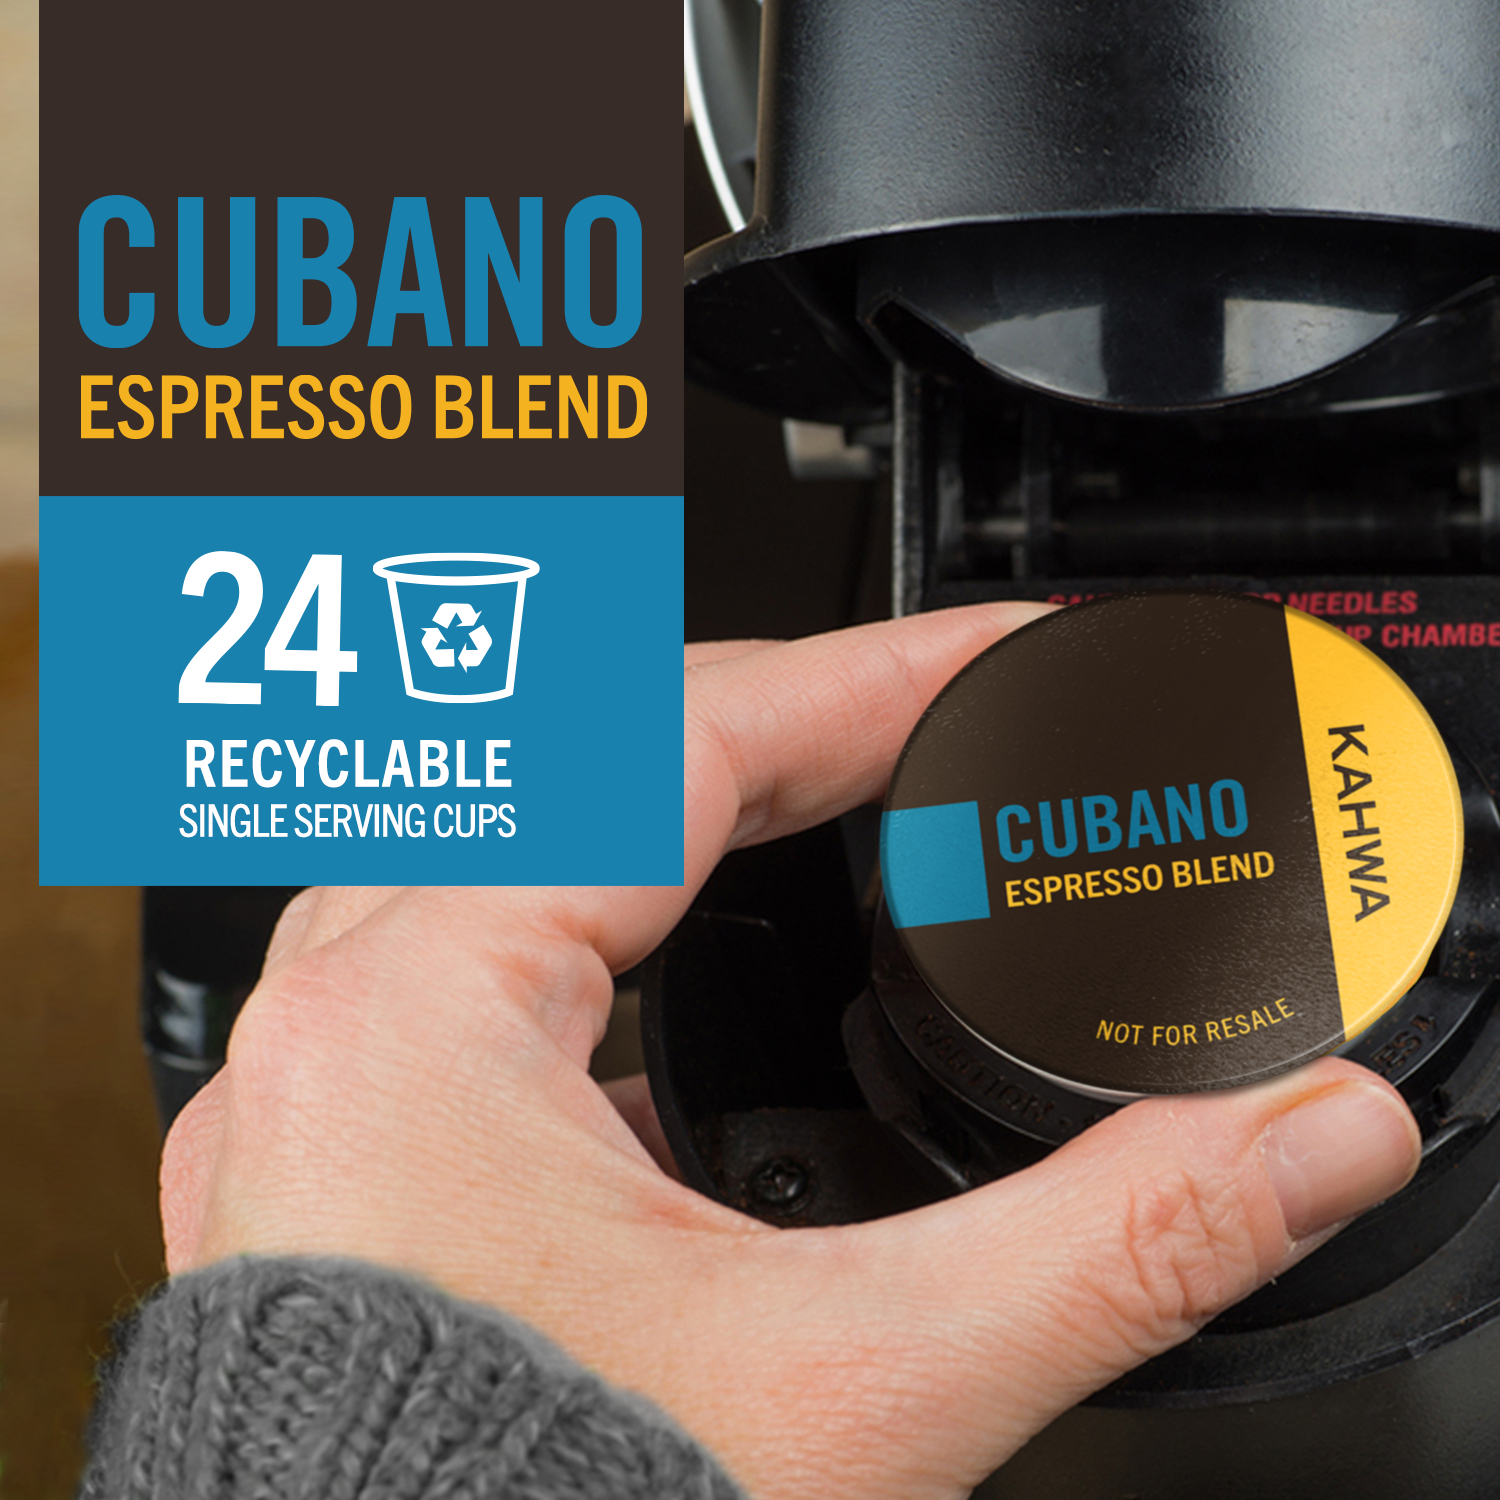 Cuban Cups and Coffee Maker as a Special Gift. Traditional Cuban Maker.